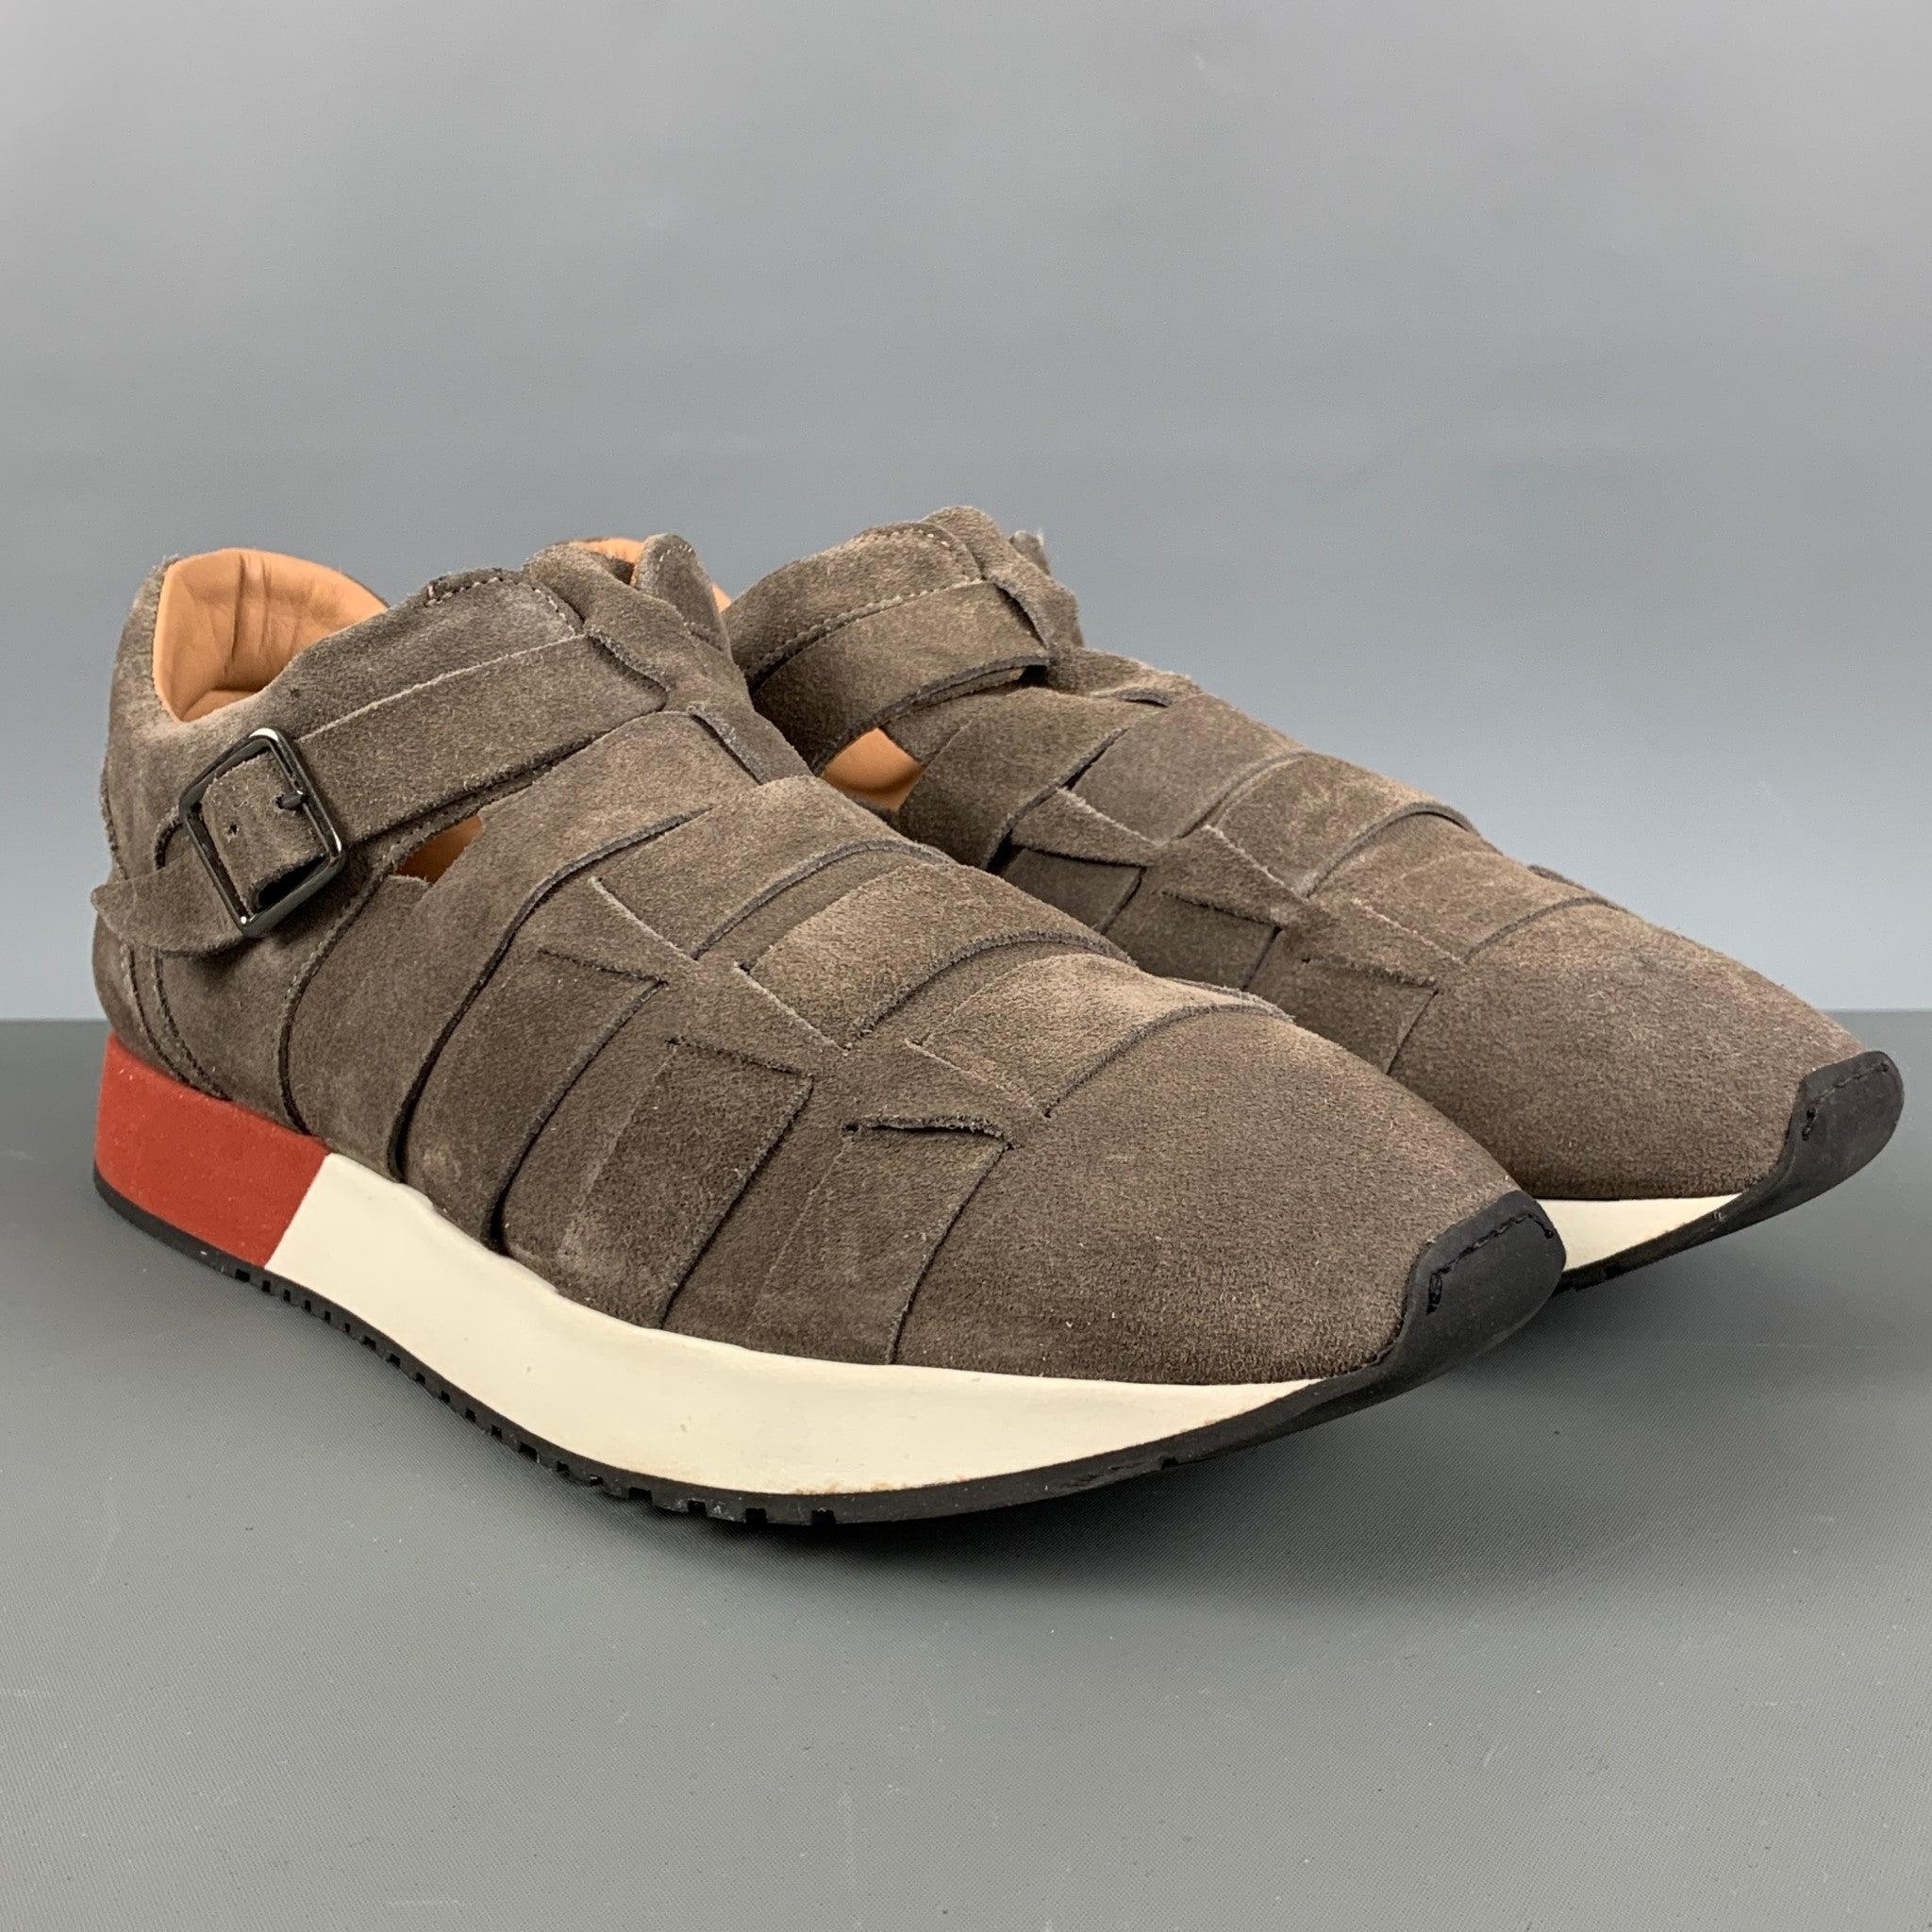 EMPORIO ARMANI sneakers comes in a grey taupe suede leather featuring a low style, rubber sole, and a single buckle closure. Made in Spainches Very Good Pre- Owned Conditions. 

Marked:   X4L039 91/2Outsole: 12.25 inches  x 4.5 inches 
  
  
